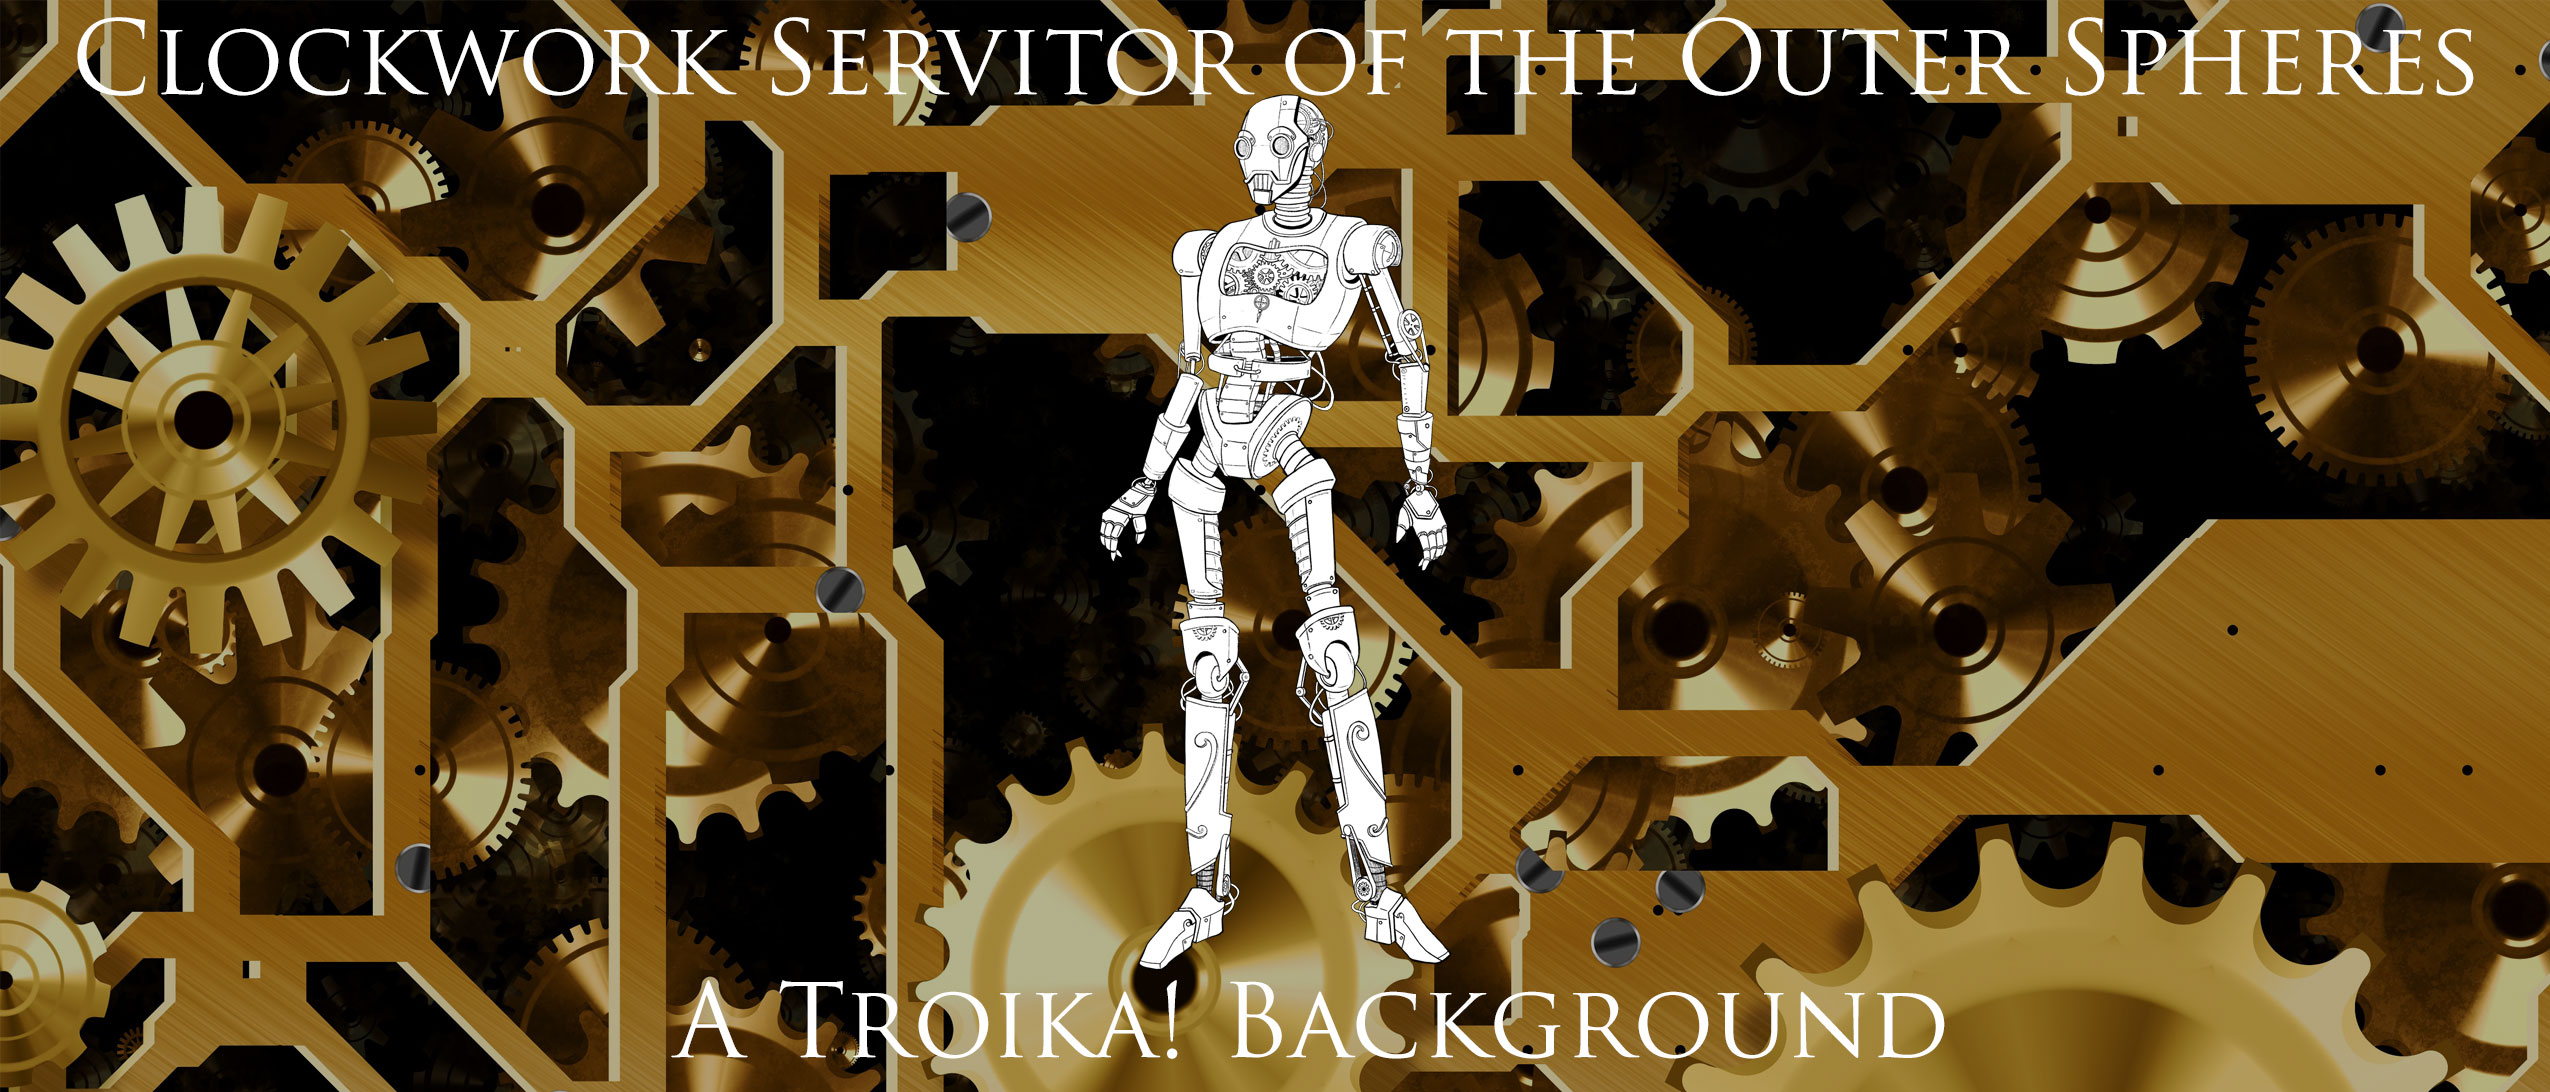 Clockwork Servitor of the Outer Spheres - A Troika! Background